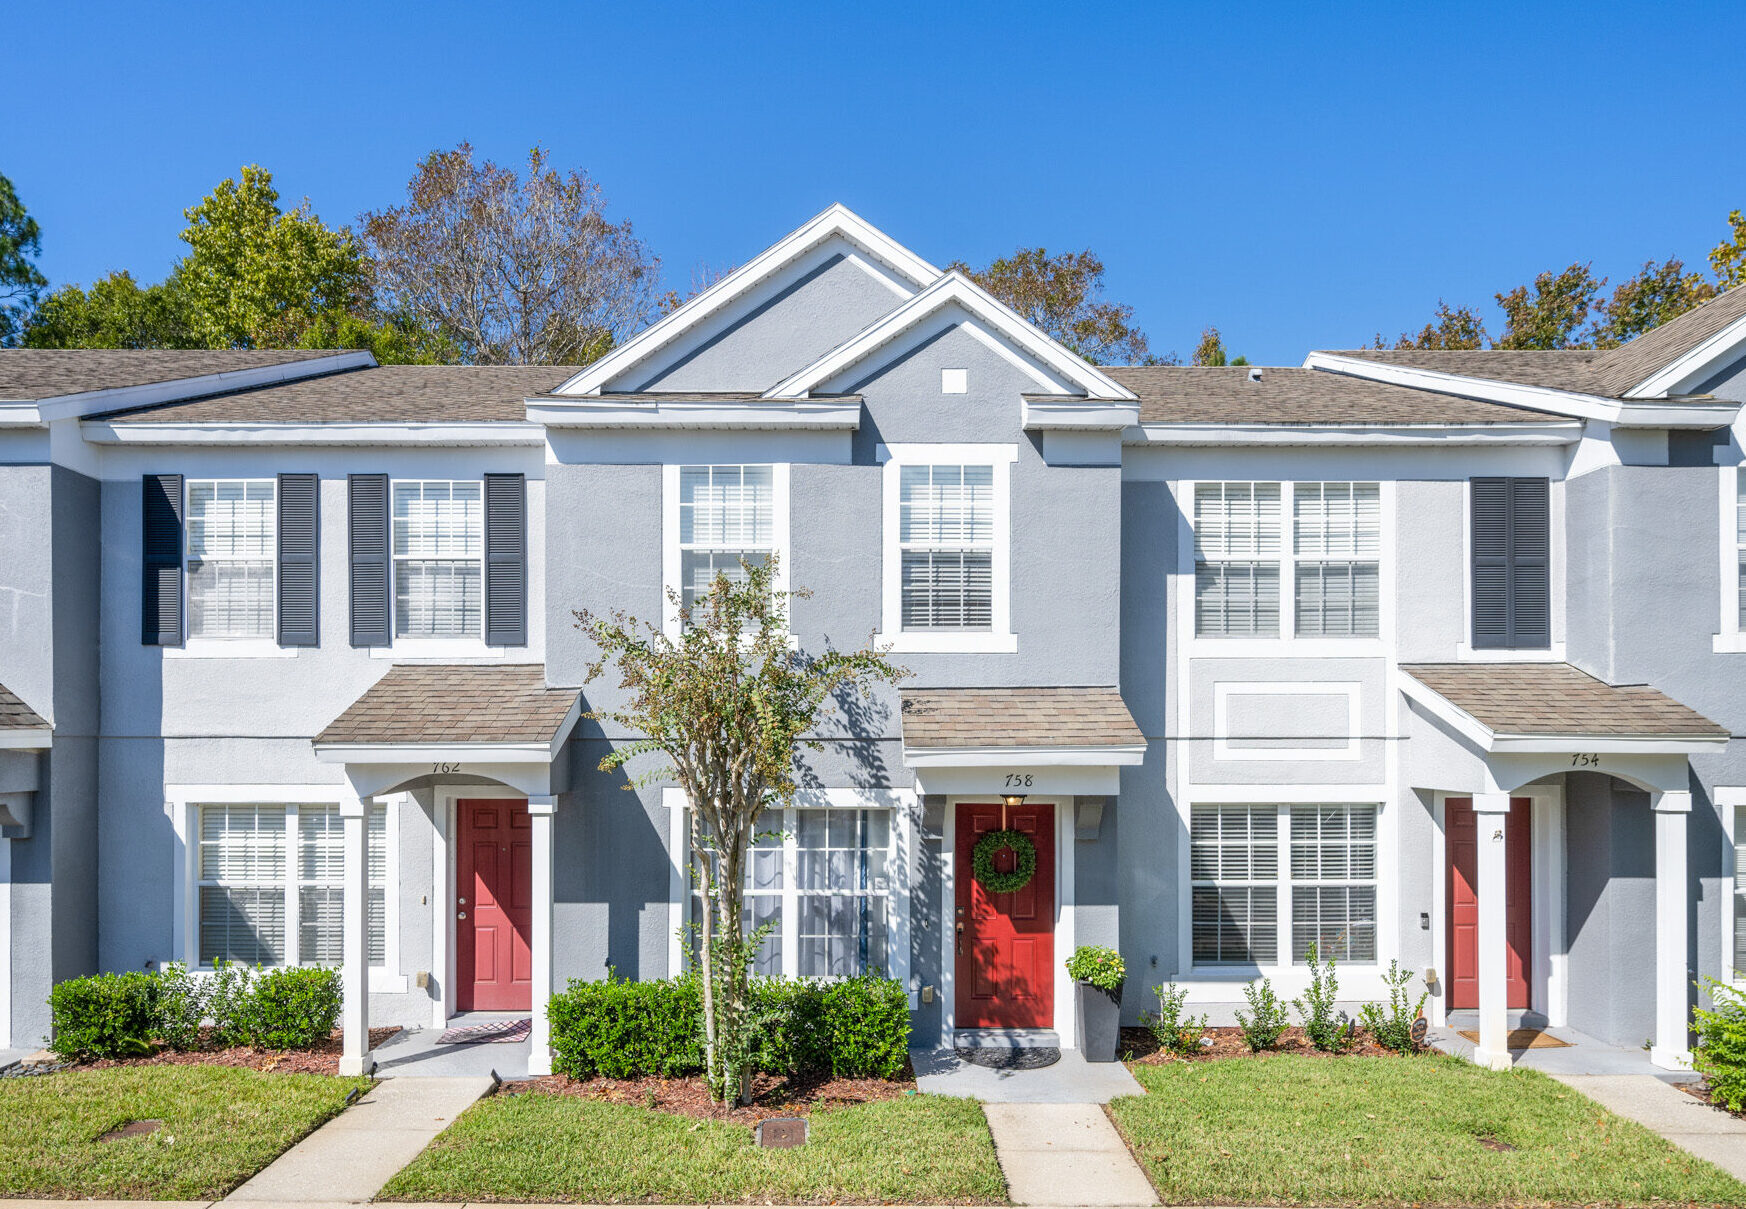 758 Shropshire Loop Townhome for Sale in Sanford, FL